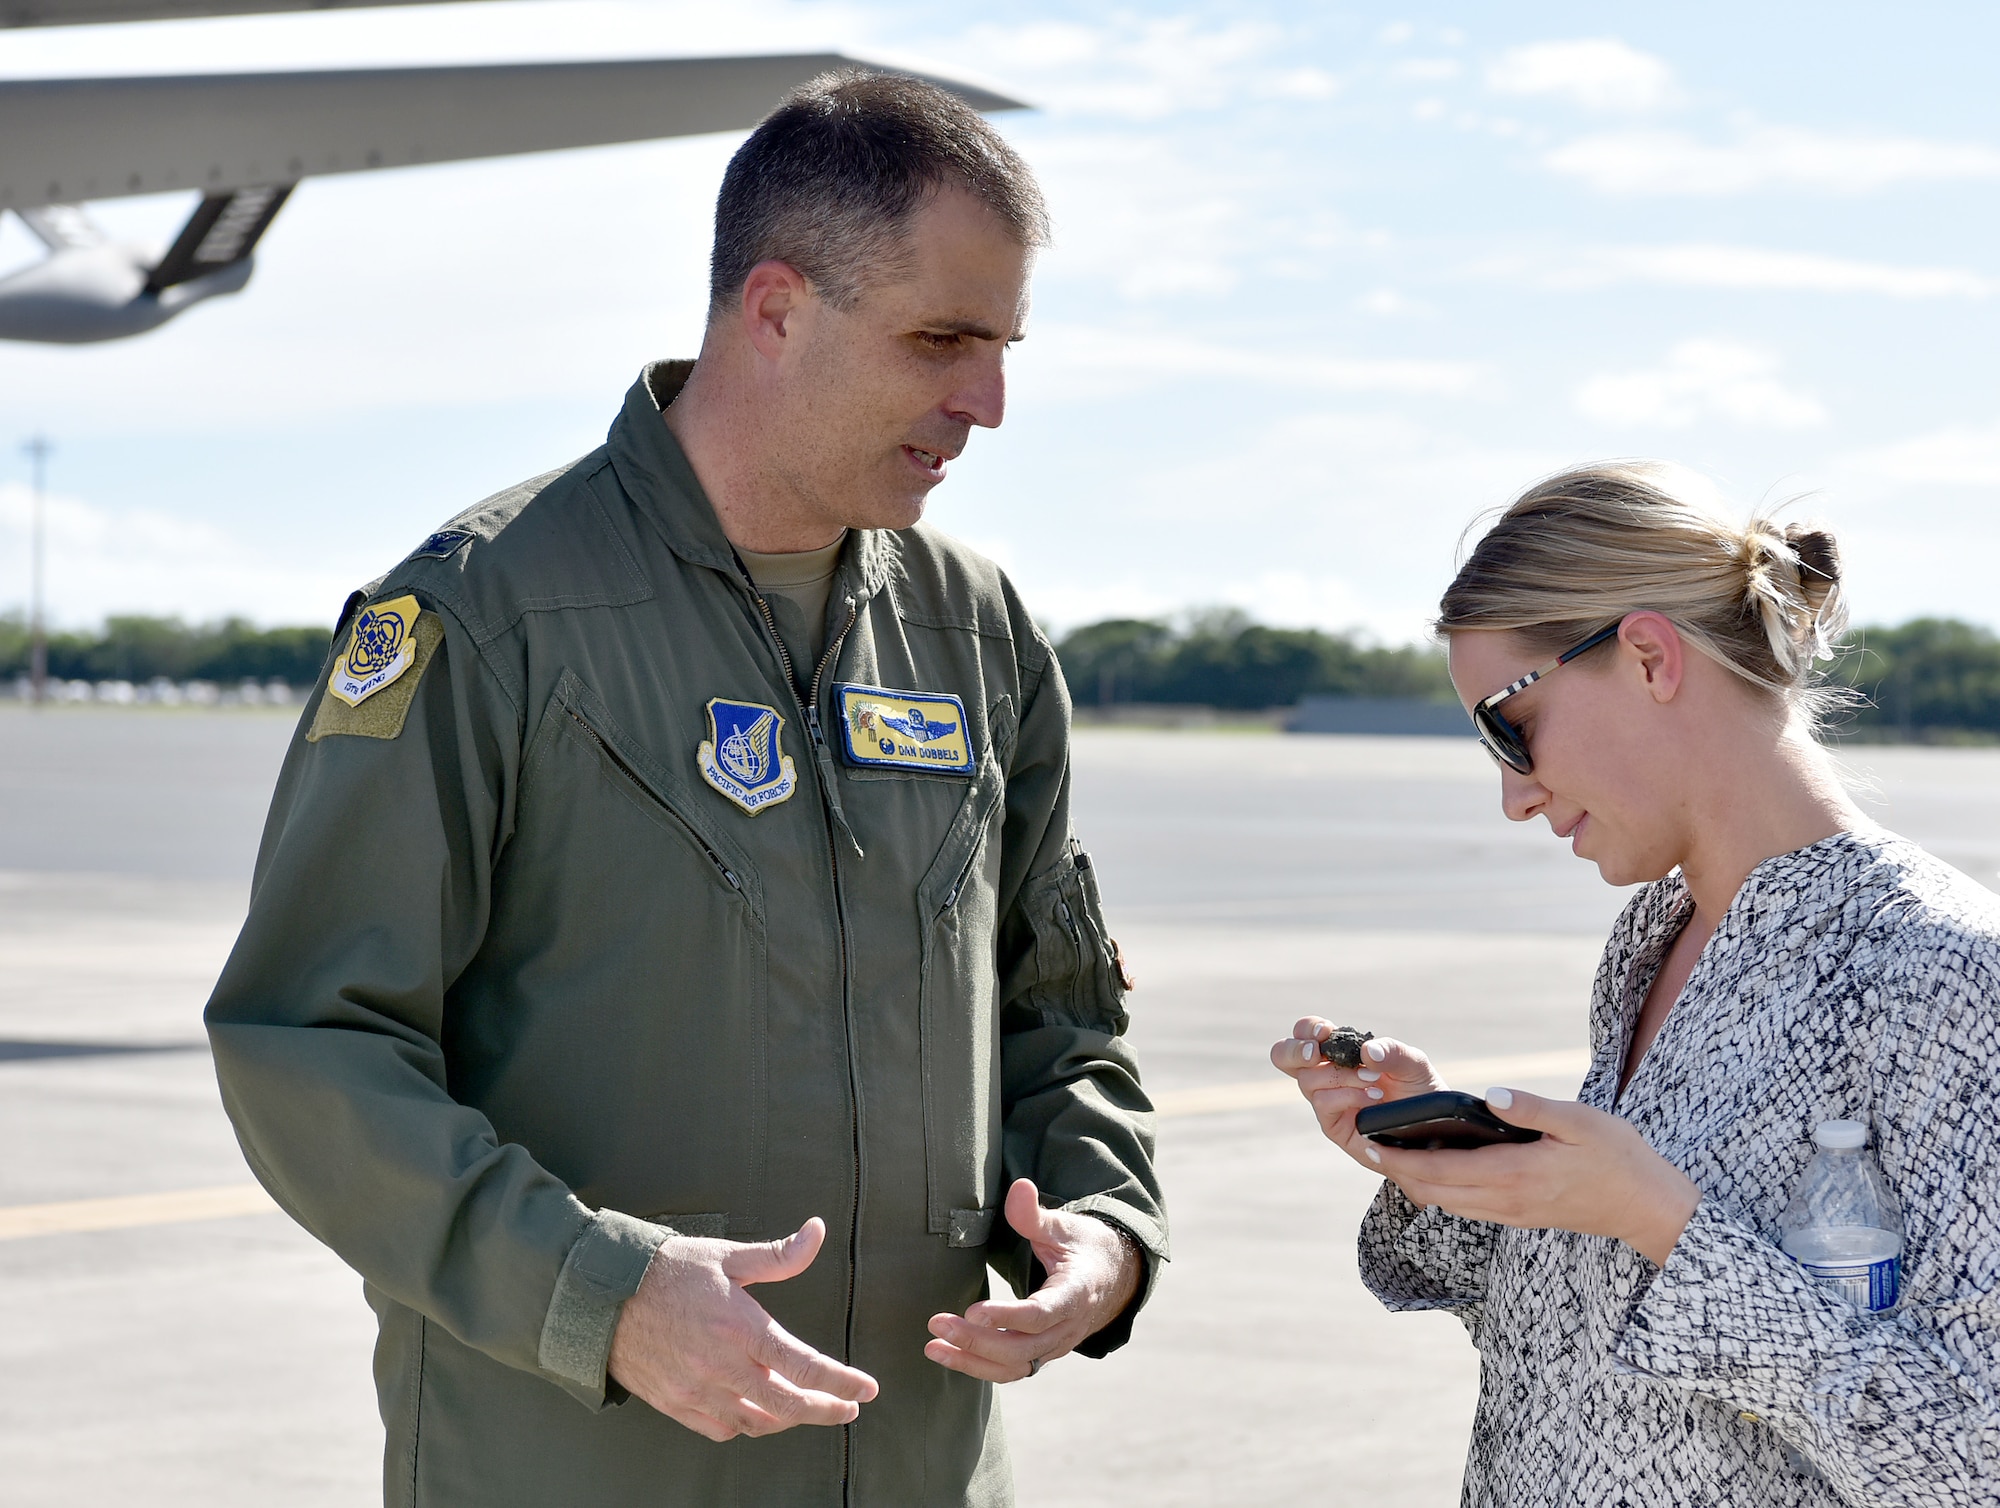 U.S. Air Force Col. Daniel Dobbels, 15th Wing commander, discusses the impact that Foreign Object Debris on the runway can have on an aircraft with Mrs. Kellie Hartl, U.S. military legislative assistant for Rep. David Valadao during their visit to Joint Base Pearl Harbor-Hickam, Hawaii, Jan. 25, 2022. Members of the 15th Wing hosted U.S. staff delegation members of the House Appropriations Committee and discussed the role the 15th Wing has in ensuring a free and open Indo-Pacific.  (U.S. Air Force photo by Tech. Sgt. Anthony Nelson Jr.)